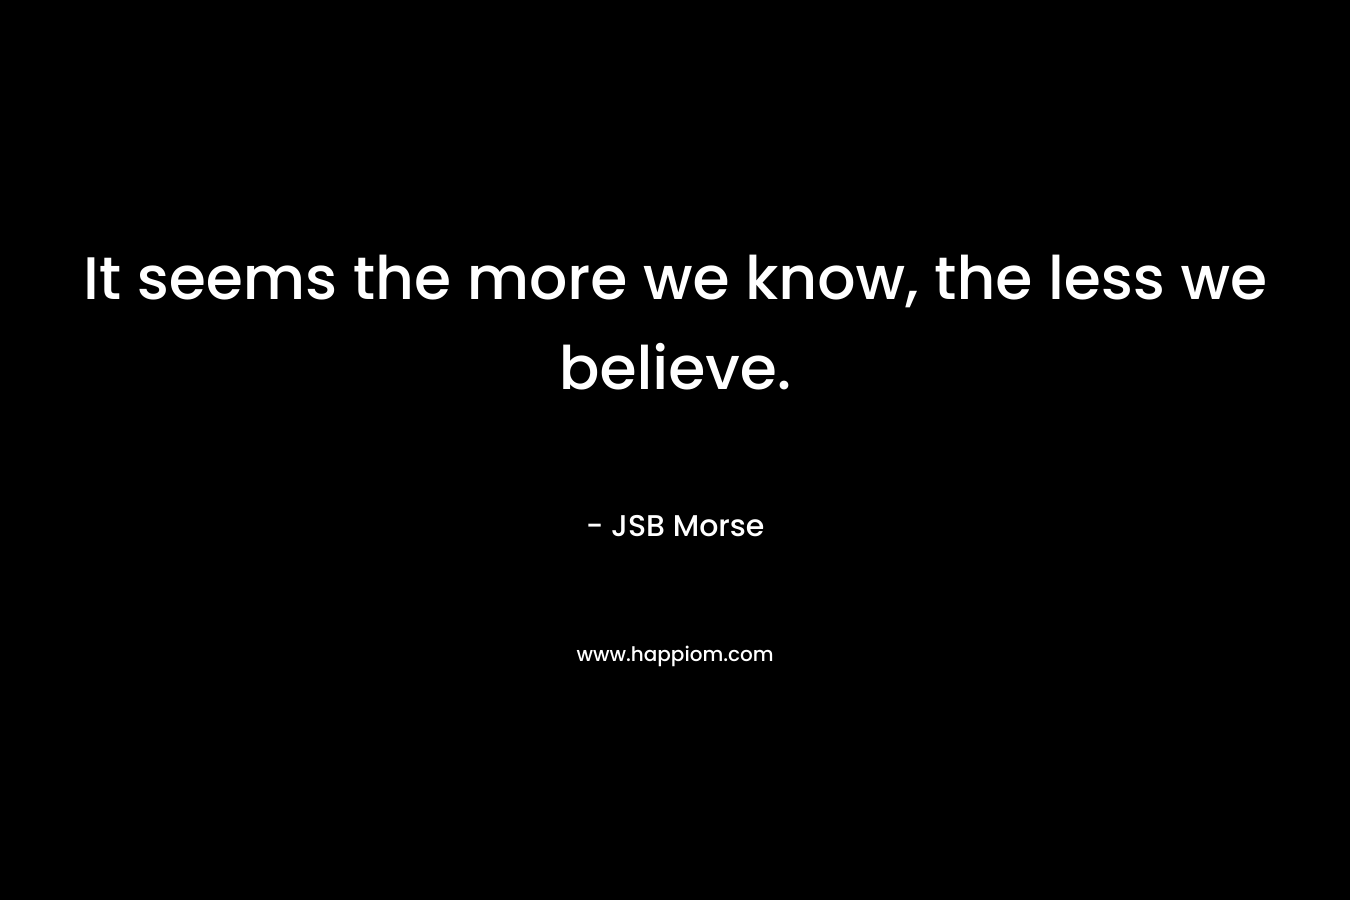 It seems the more we know, the less we believe.